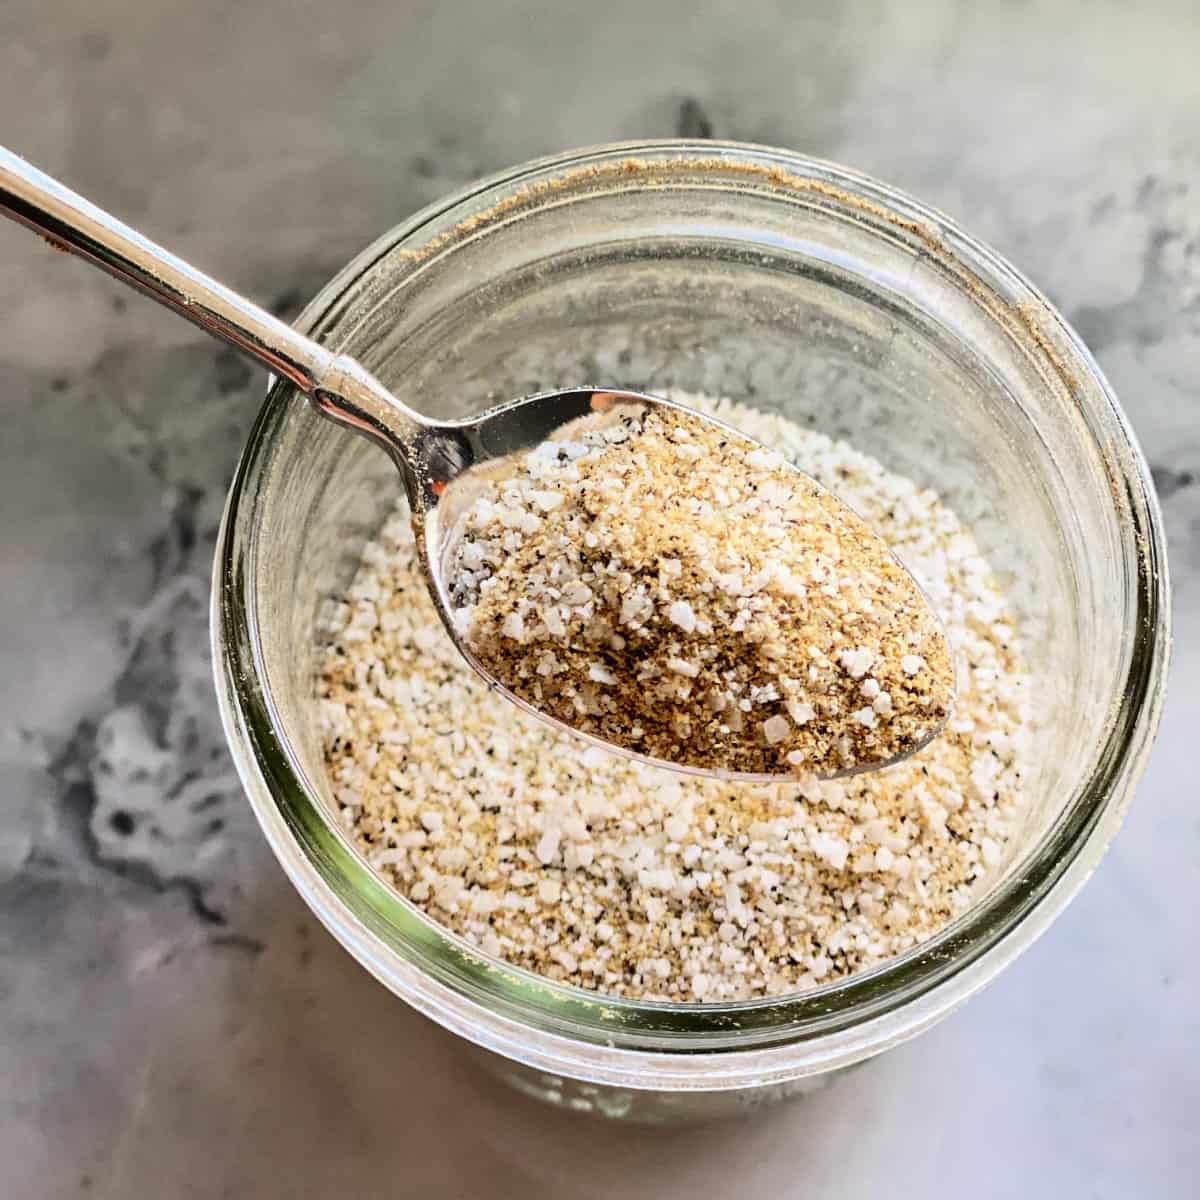 glass jar filled with seasoning and metal spoon taking a scoop out